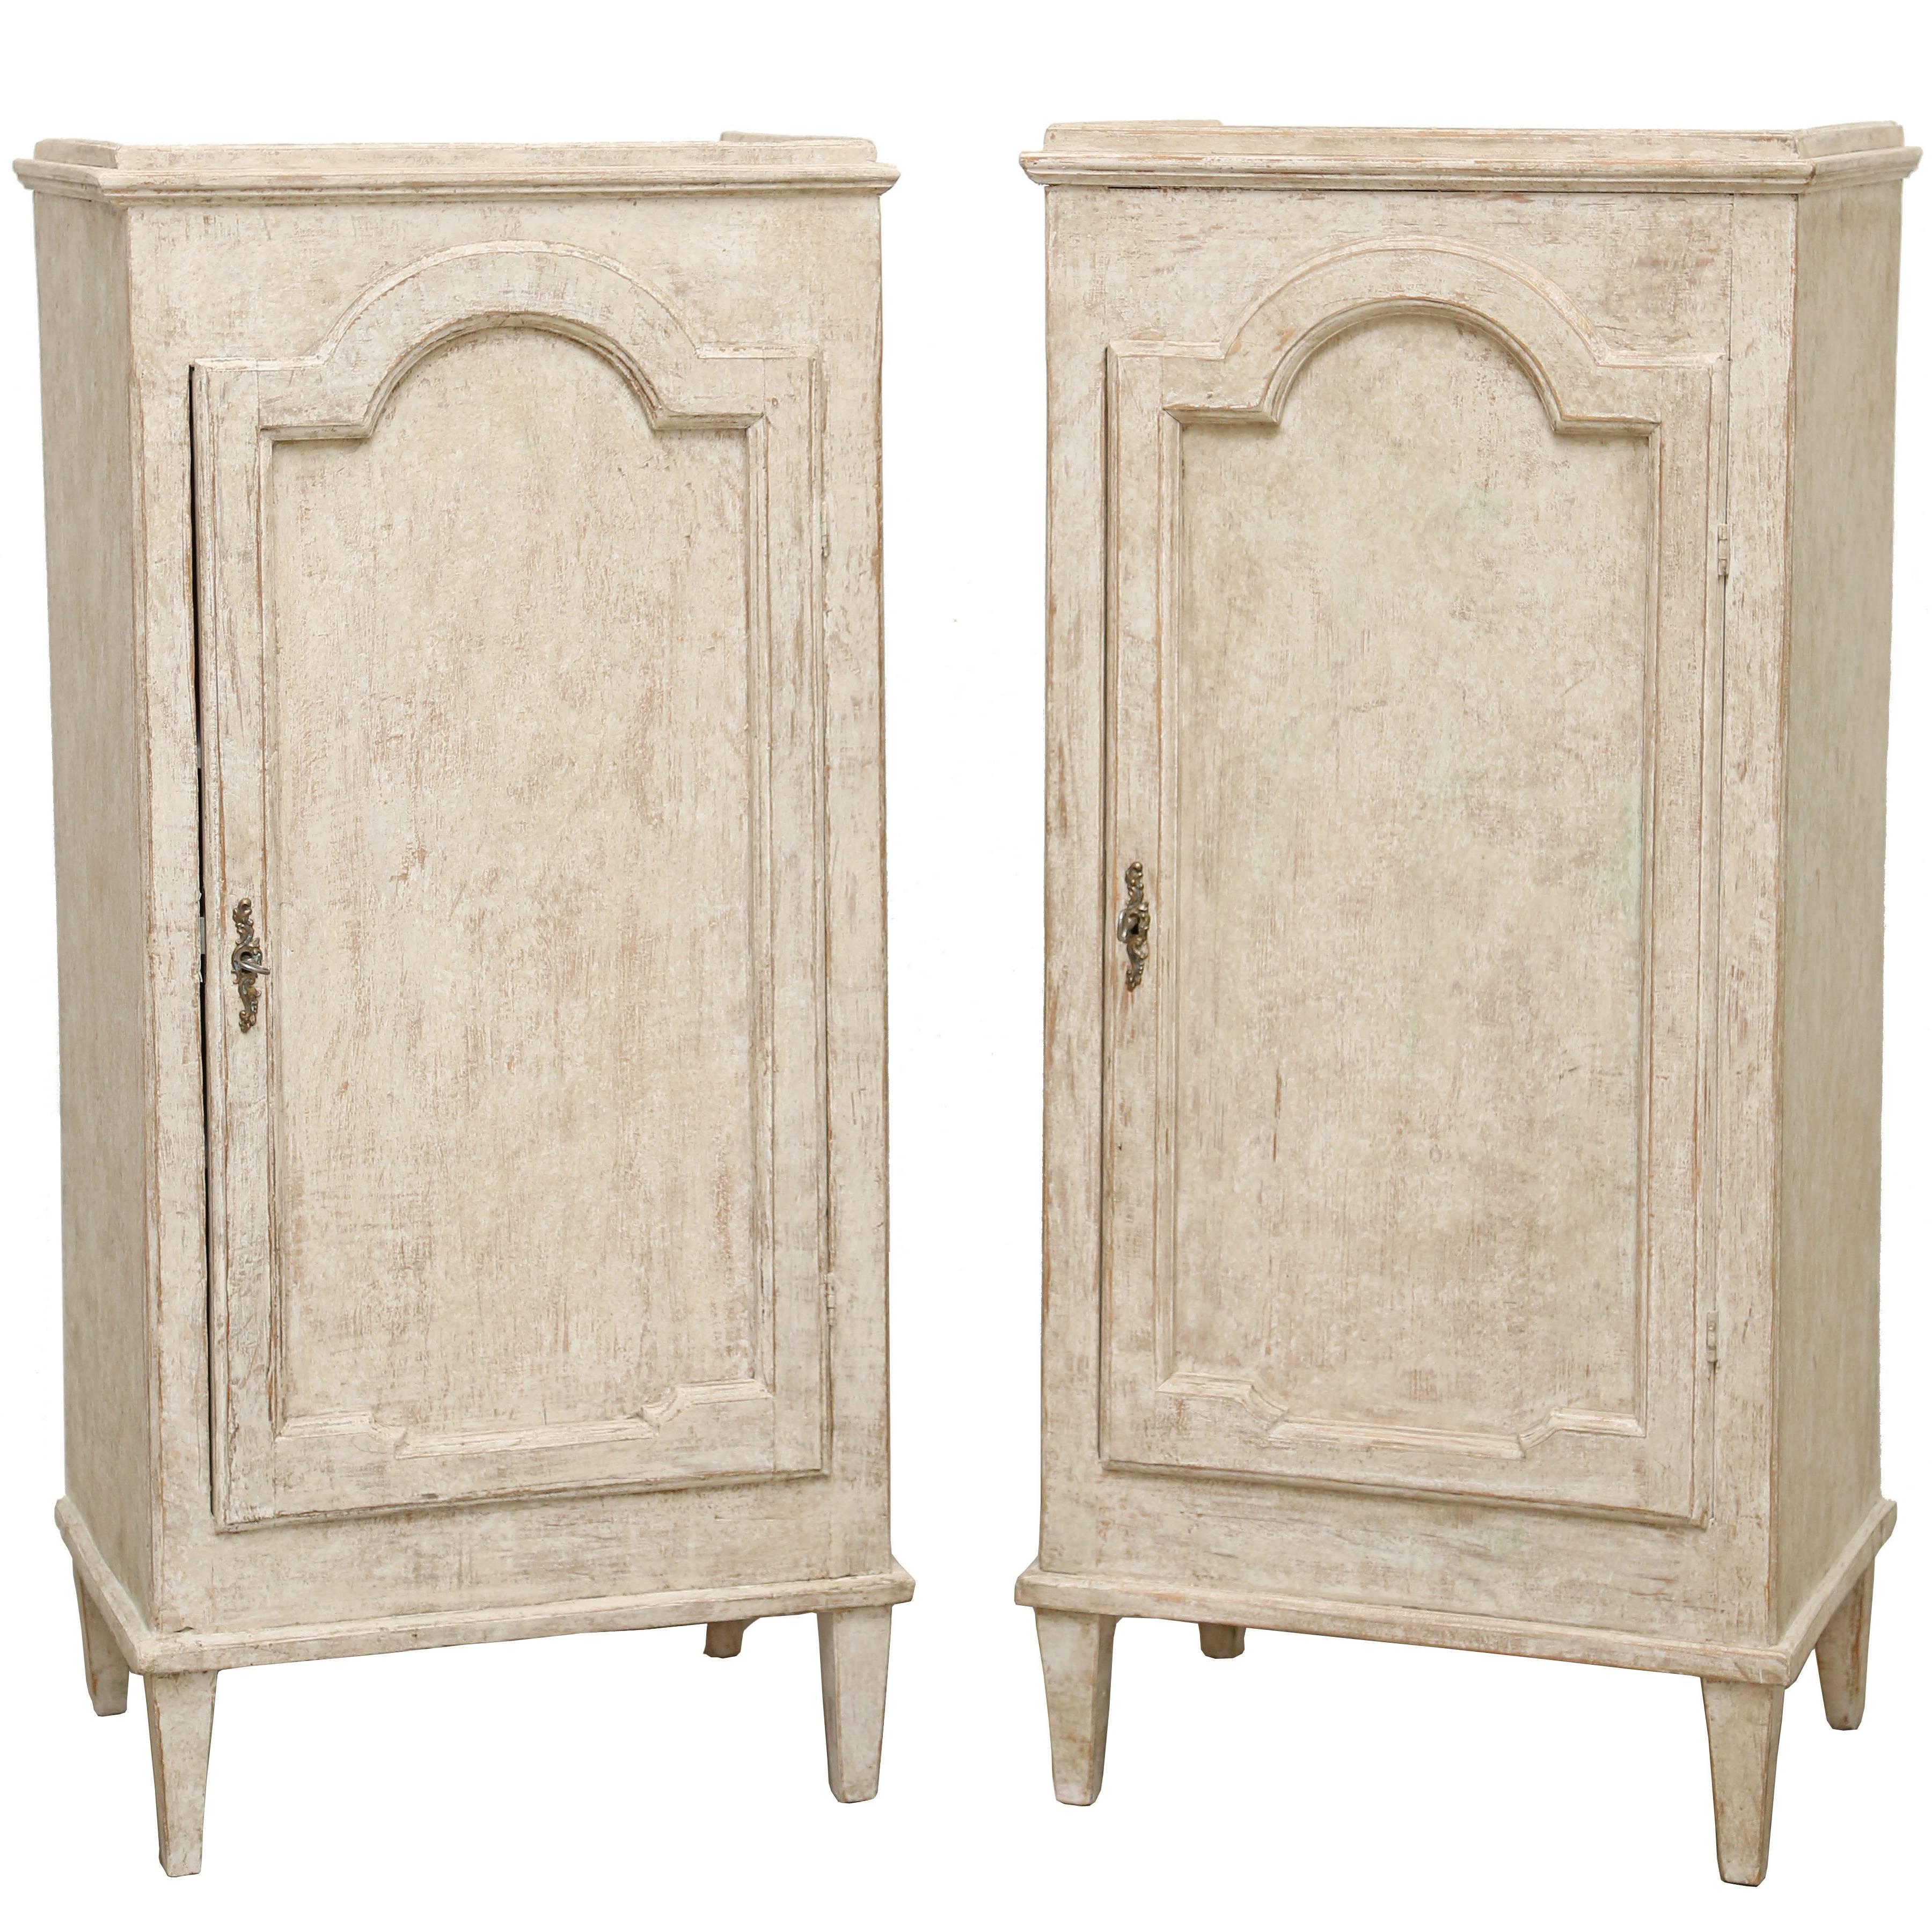 Pair of Antique Swedish Gustavian Painted Storage Cabinets, Early 19th Century